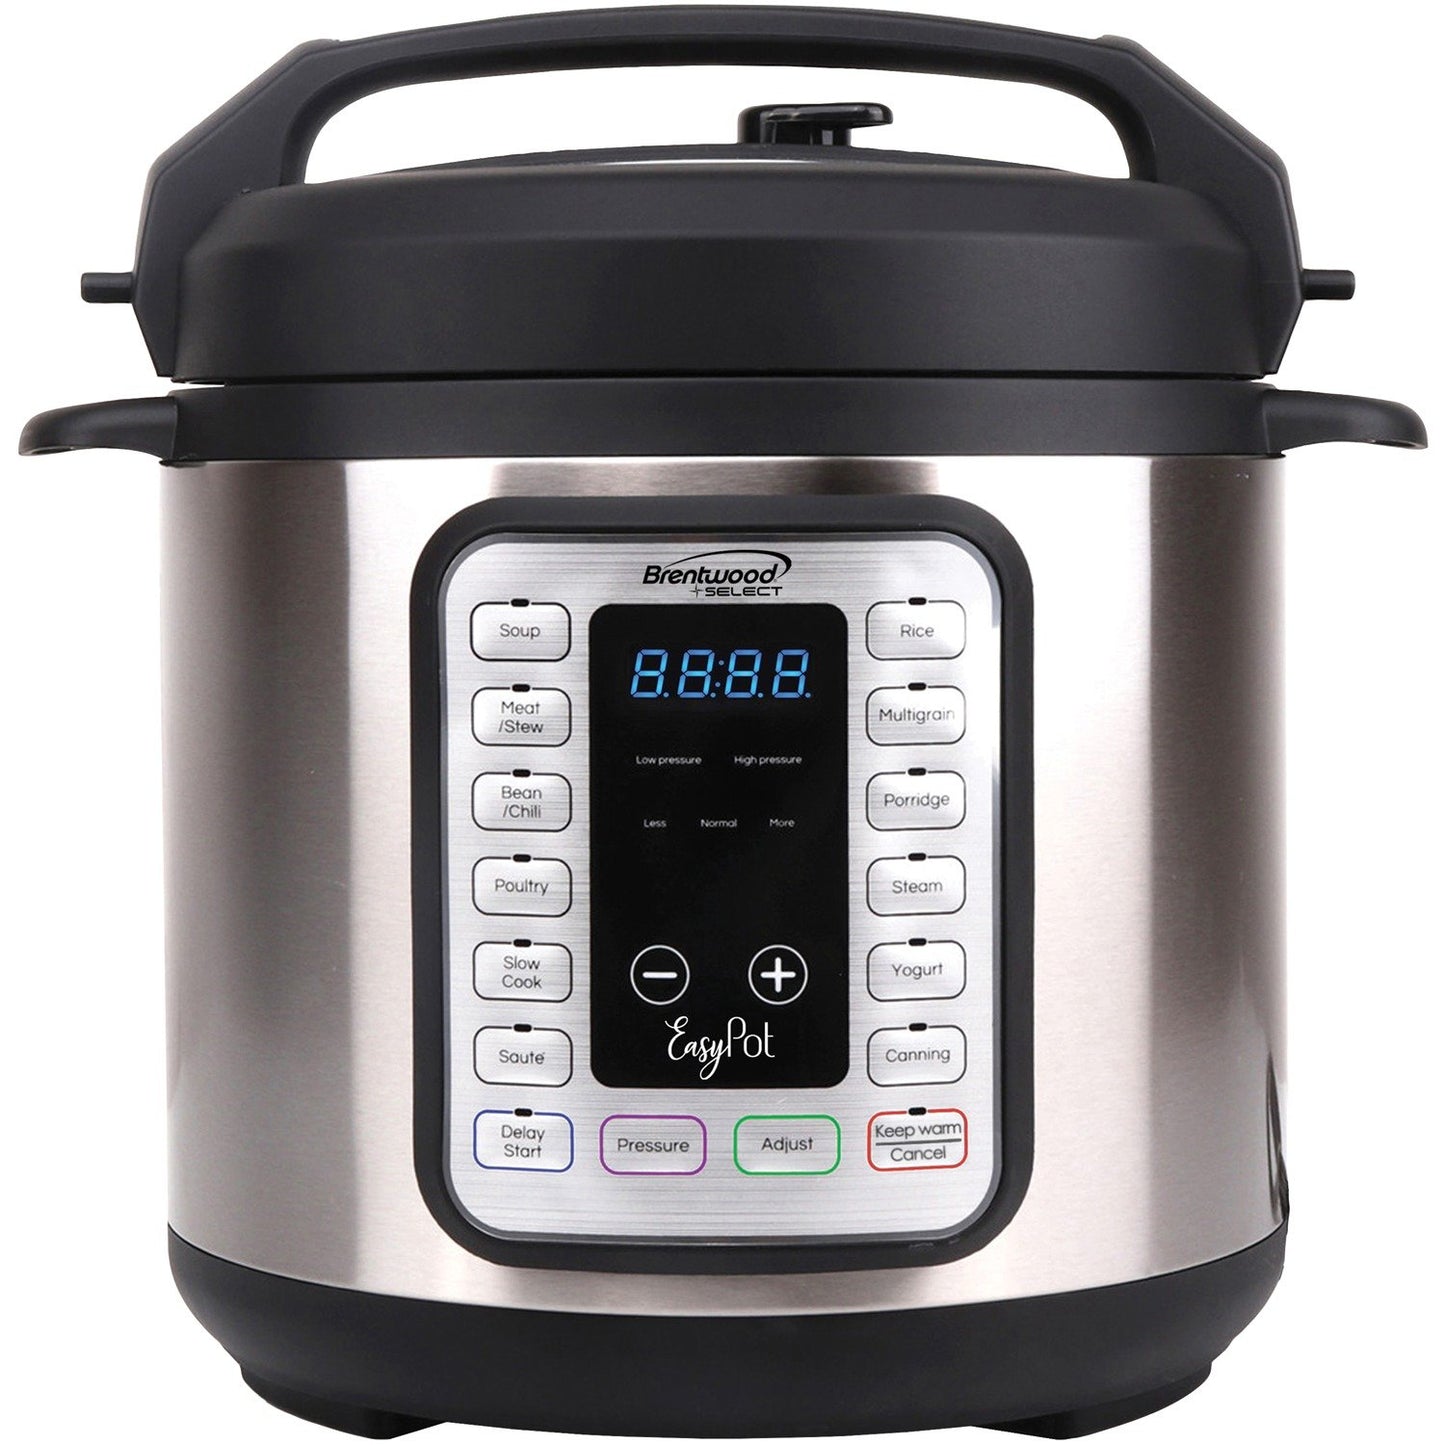 Brentwood Appliances EPC-636 6-Quart 8-in-1 Easy Pot Electric Multicooker